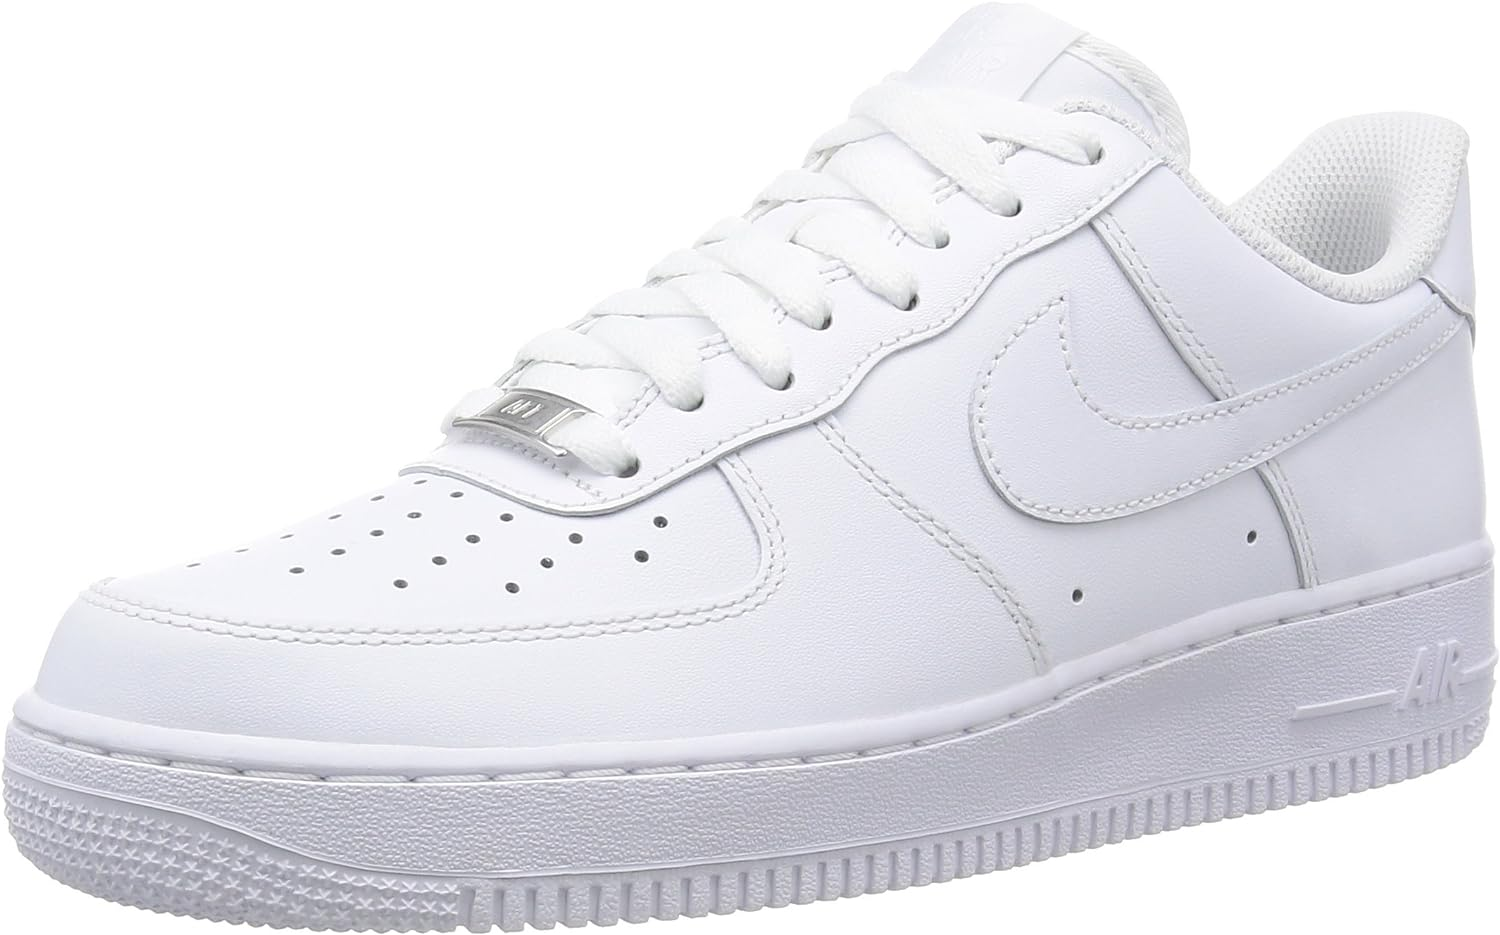 nike air force 1 in white color